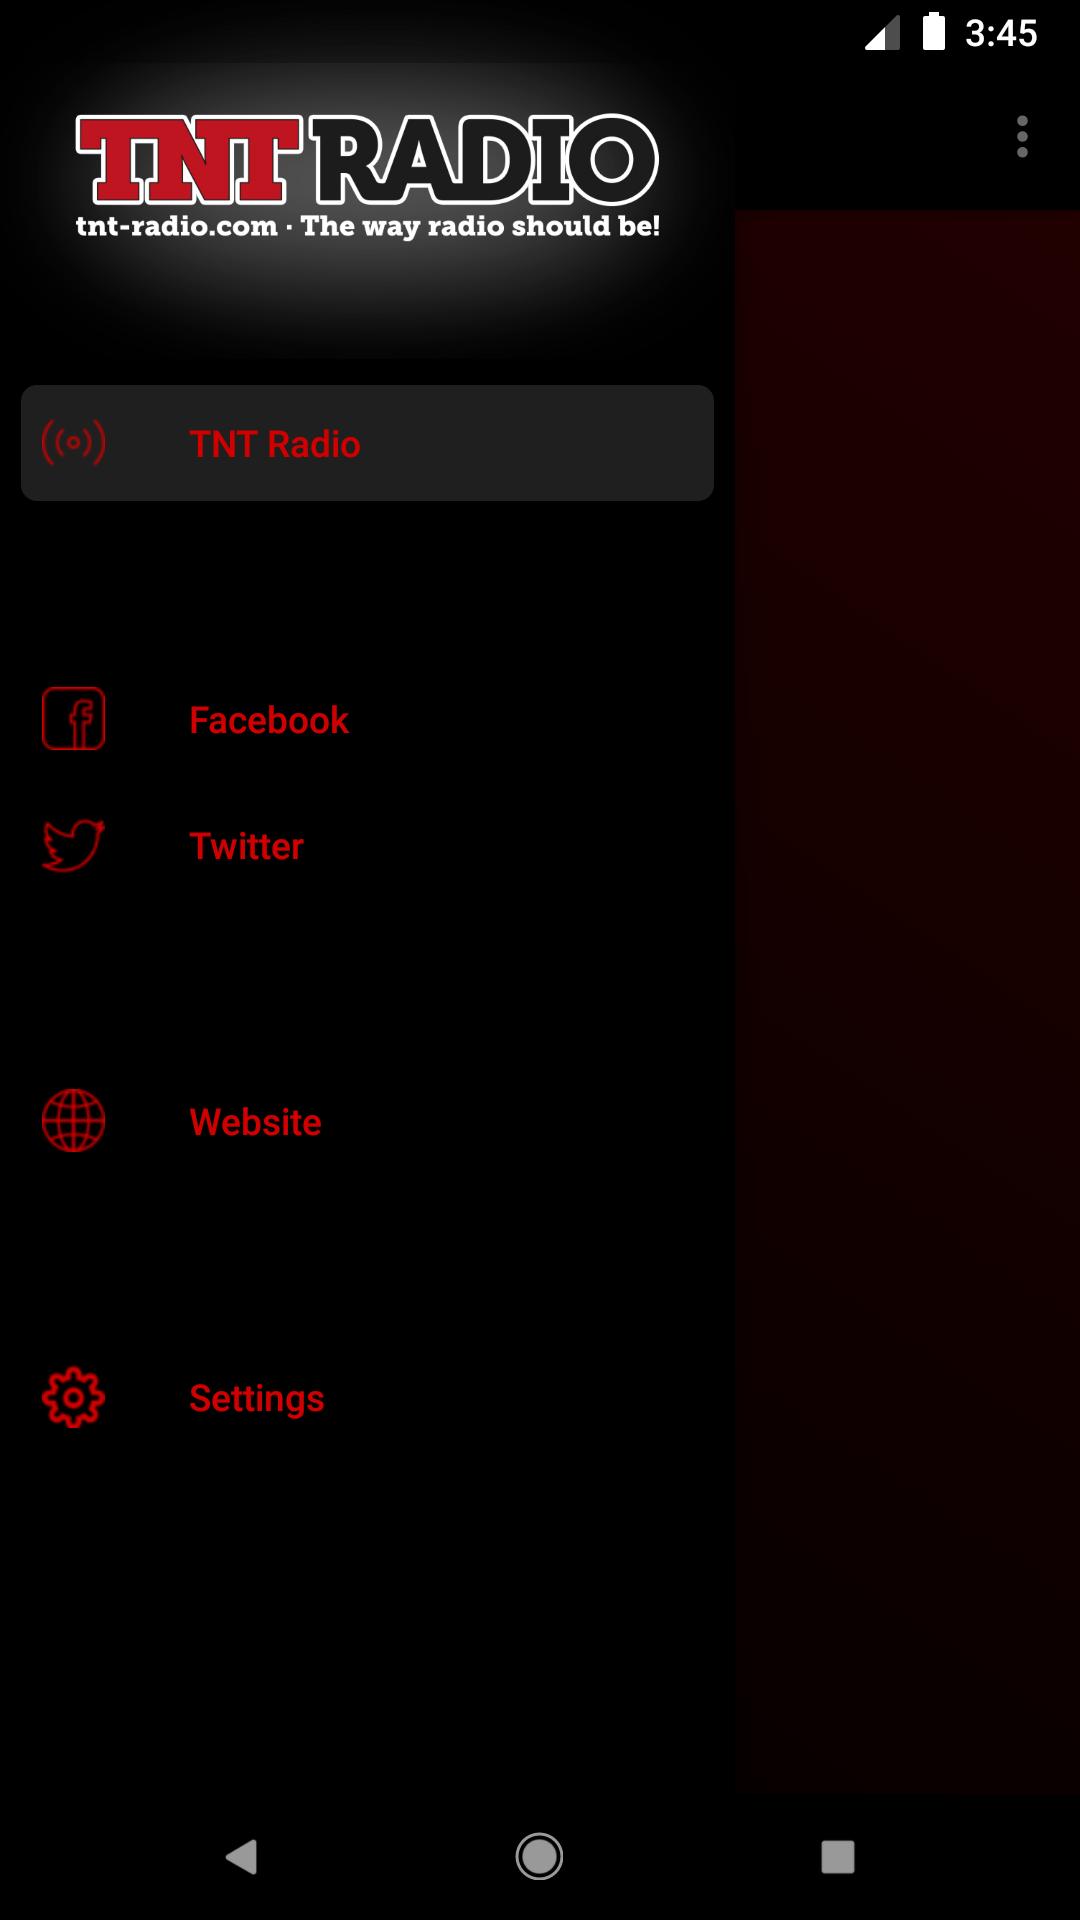 TNT Radio for Android - APK Download